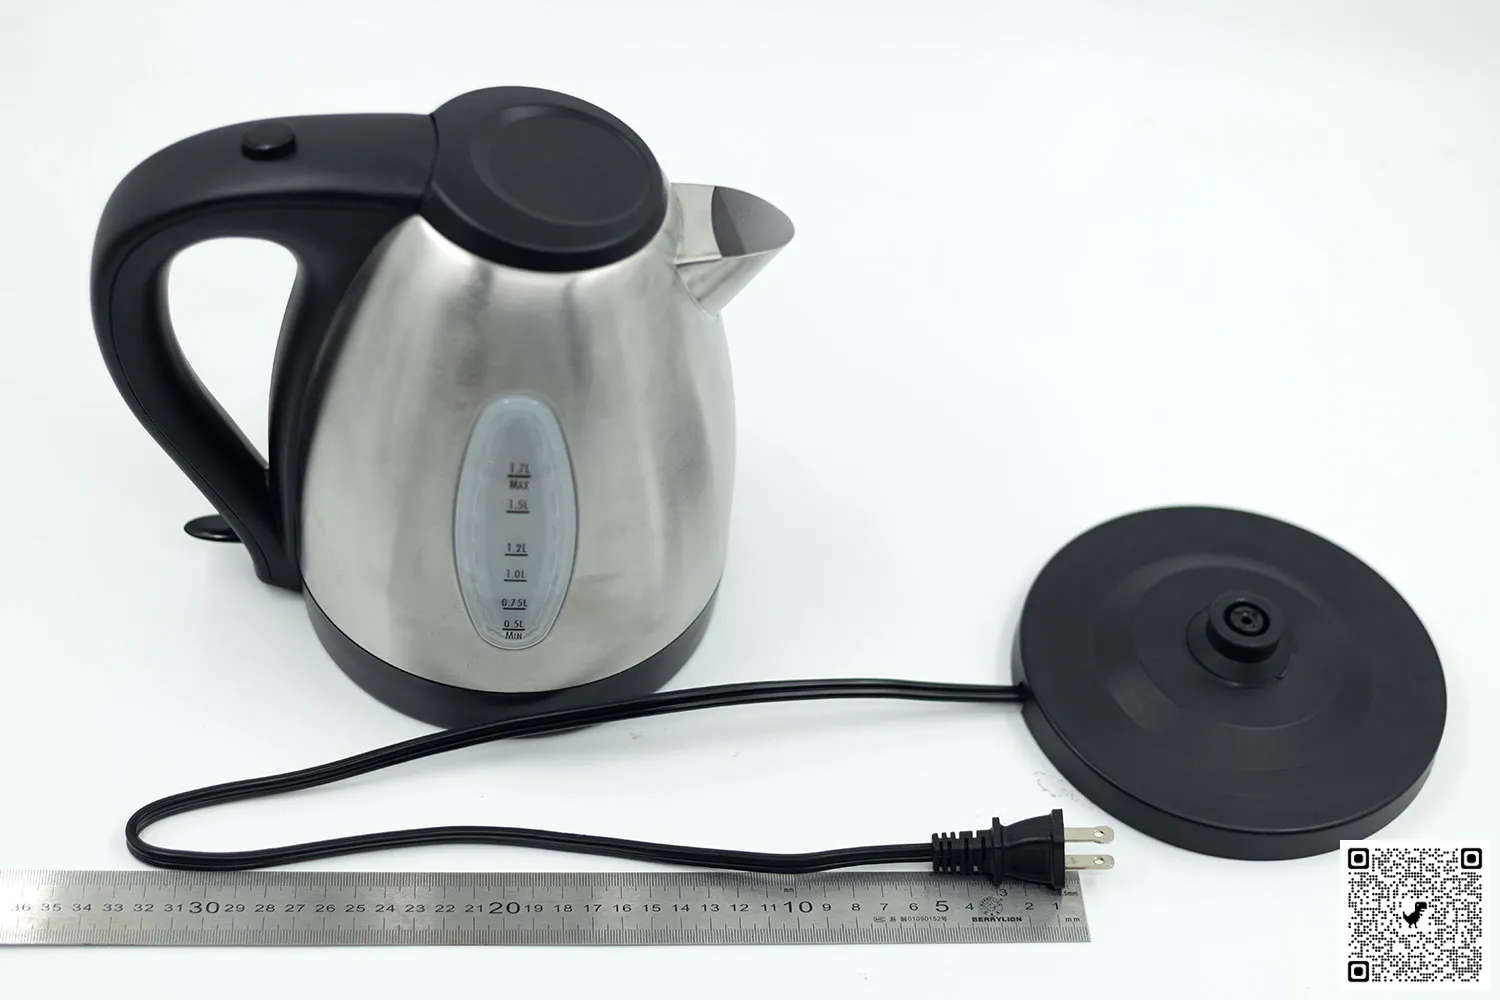 Hamilton Beach 1 Liter Electric Kettle, Stainless Steel and Black, New